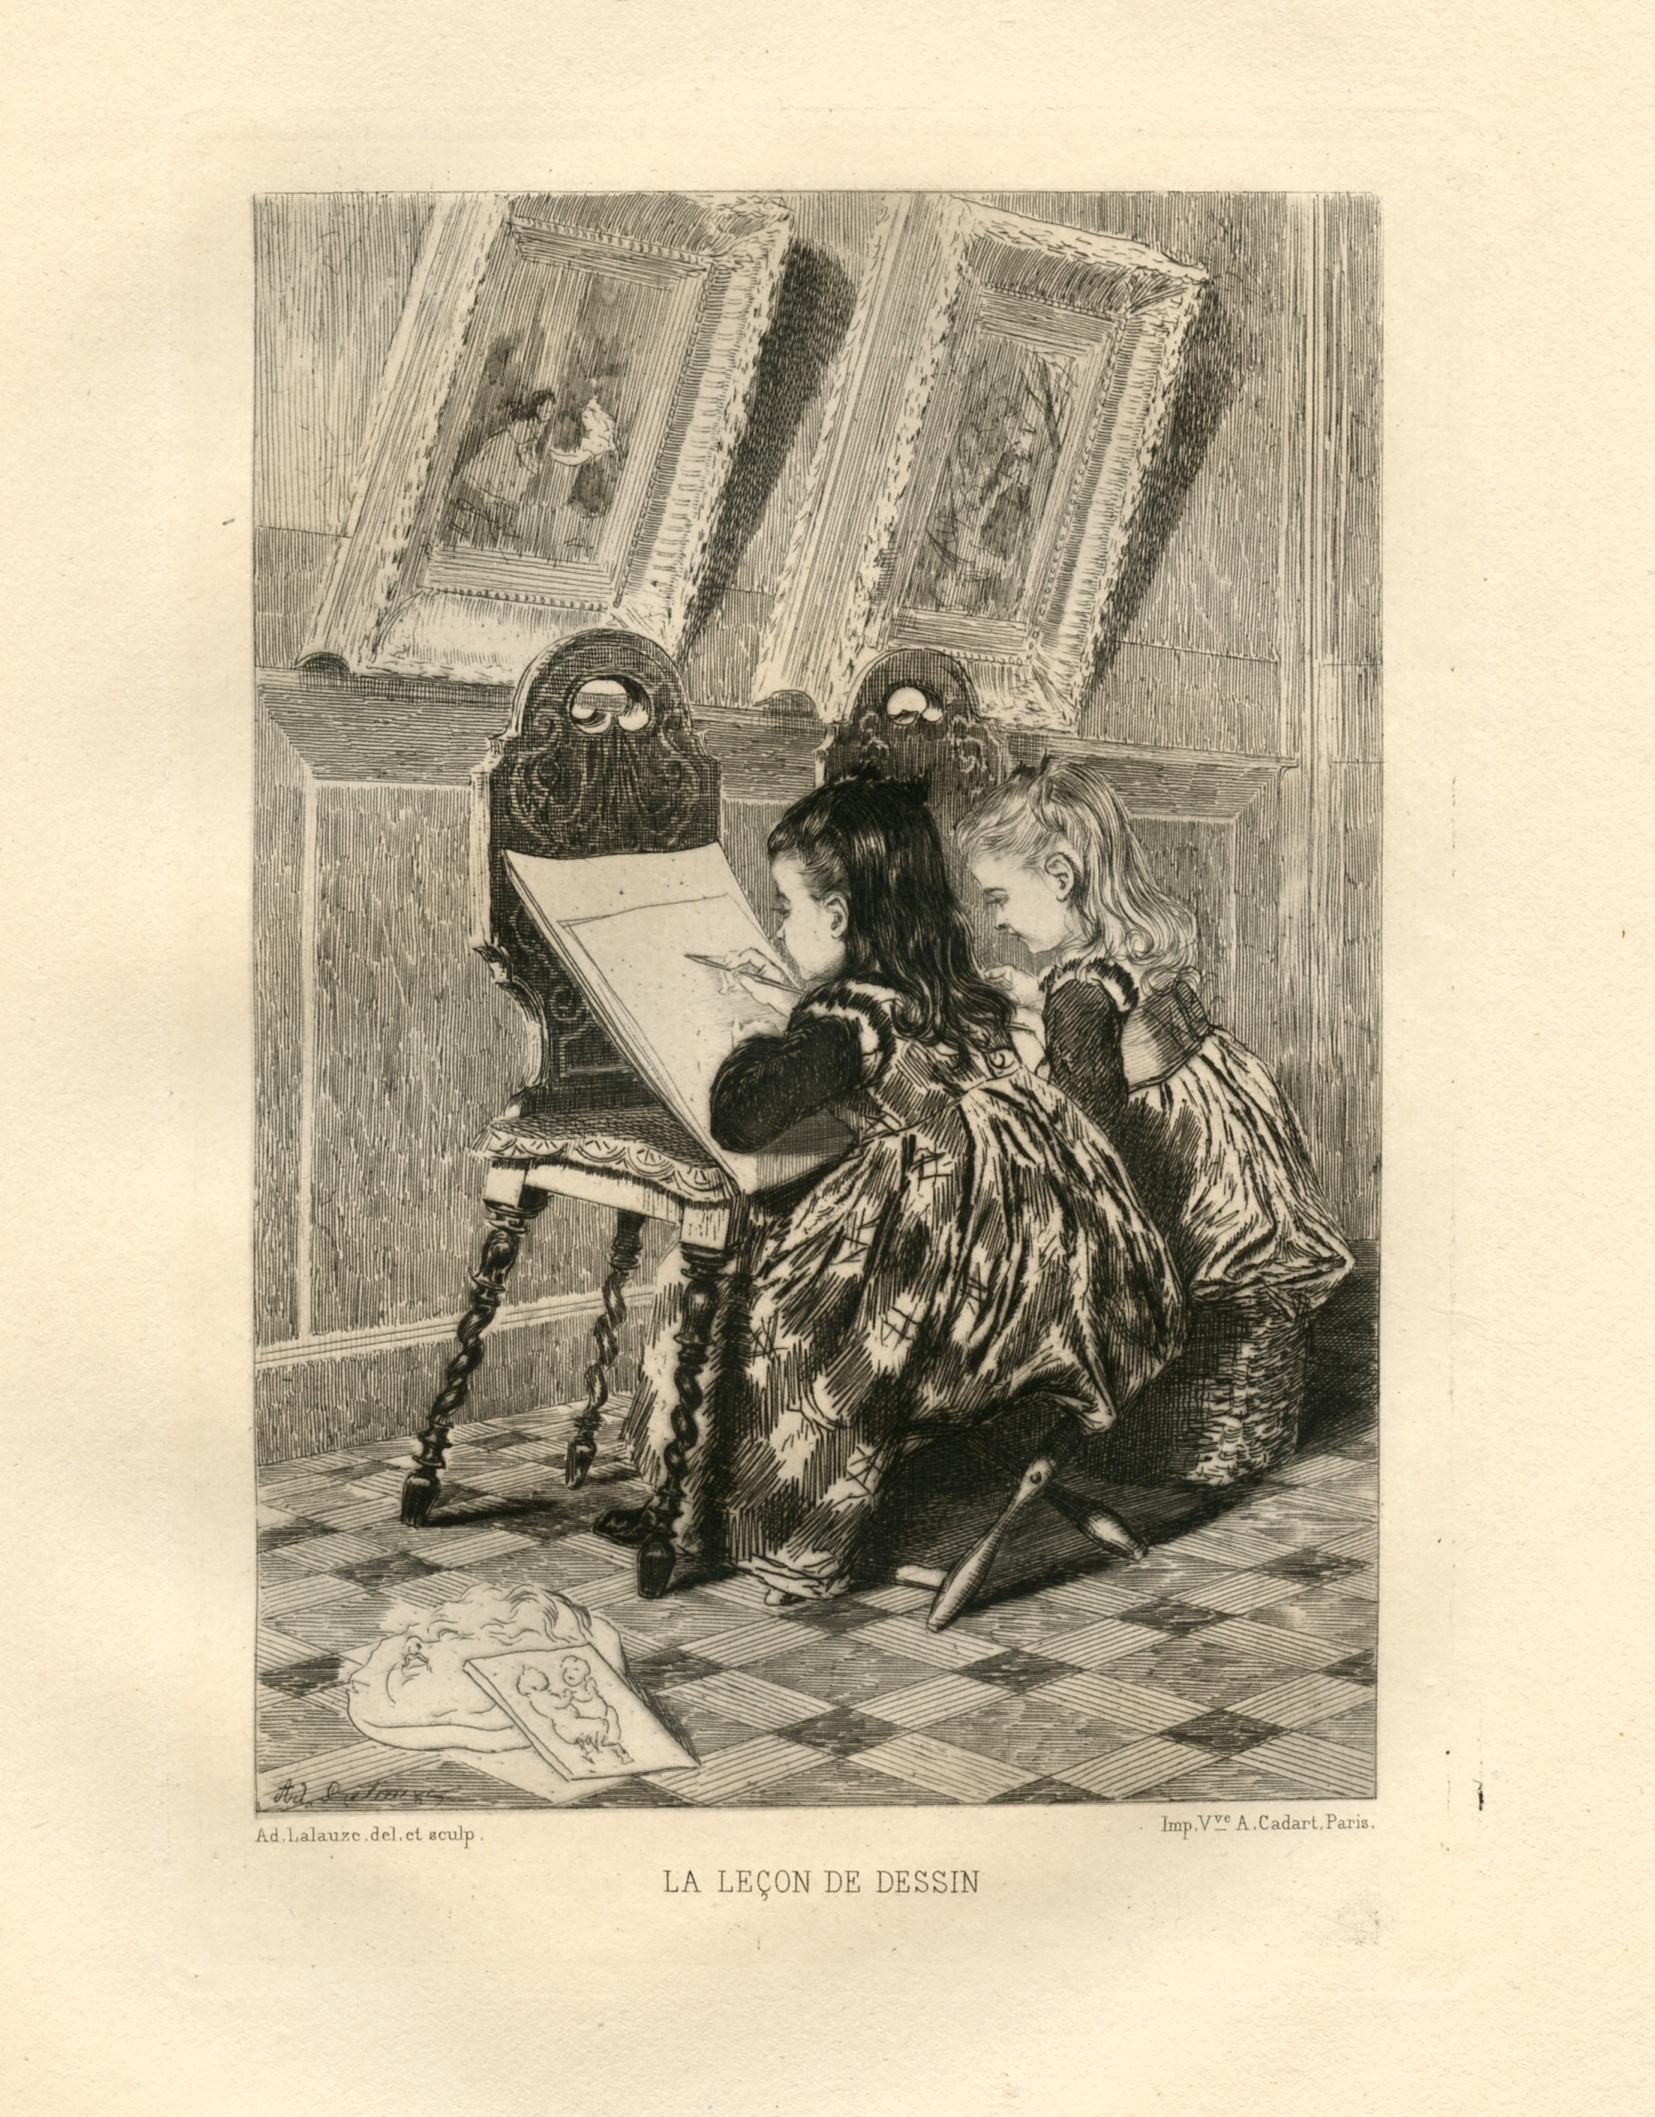 "The Drawing Lesson" original etching - Print by Adolphe Lalauze